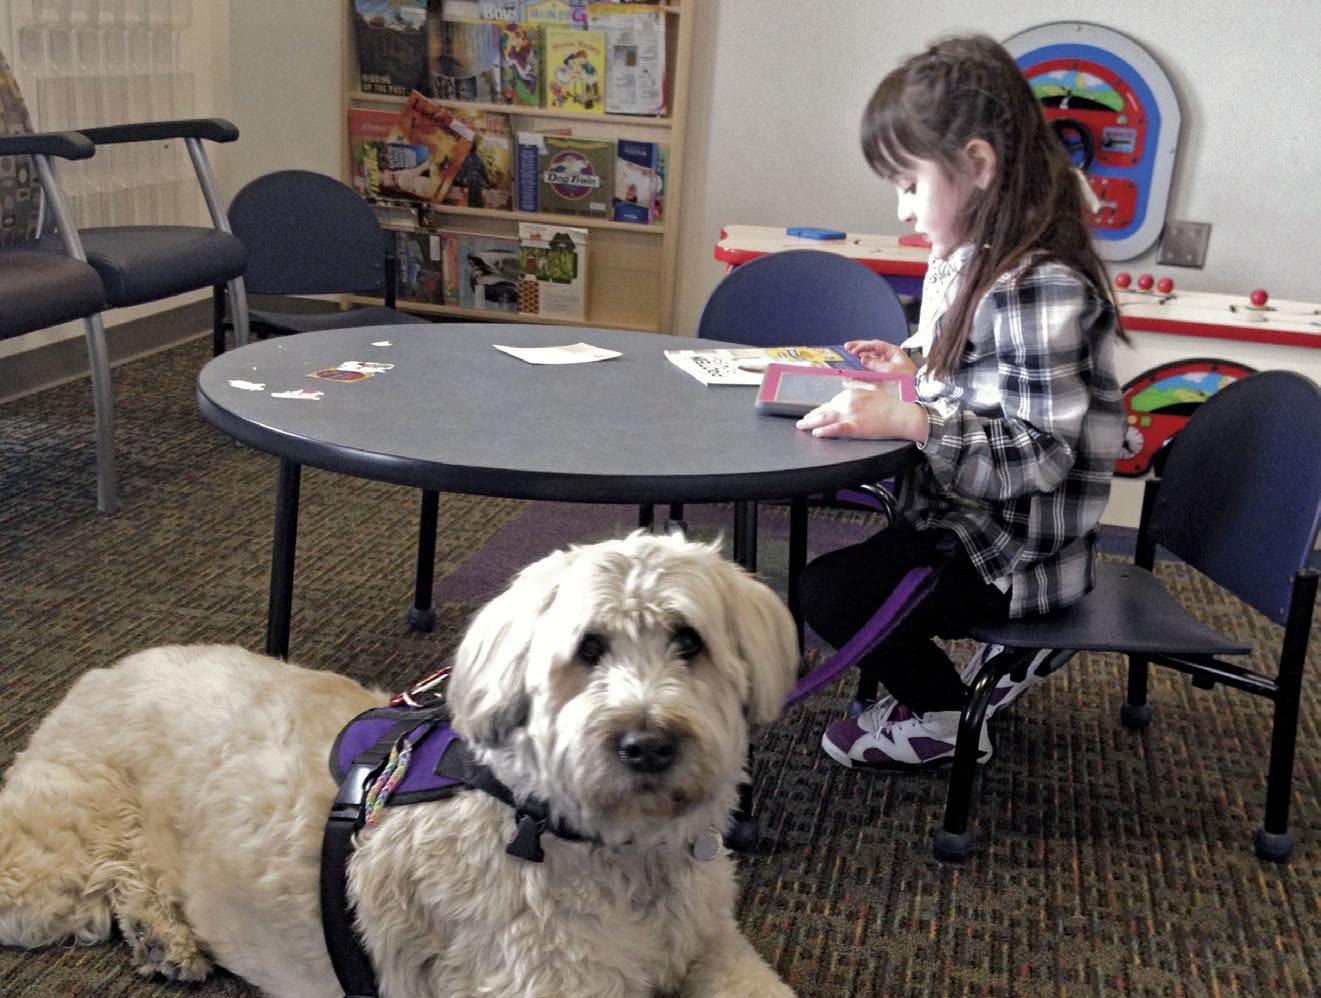 Parents Take On School Districts Refusing Service Dogs | The Bark